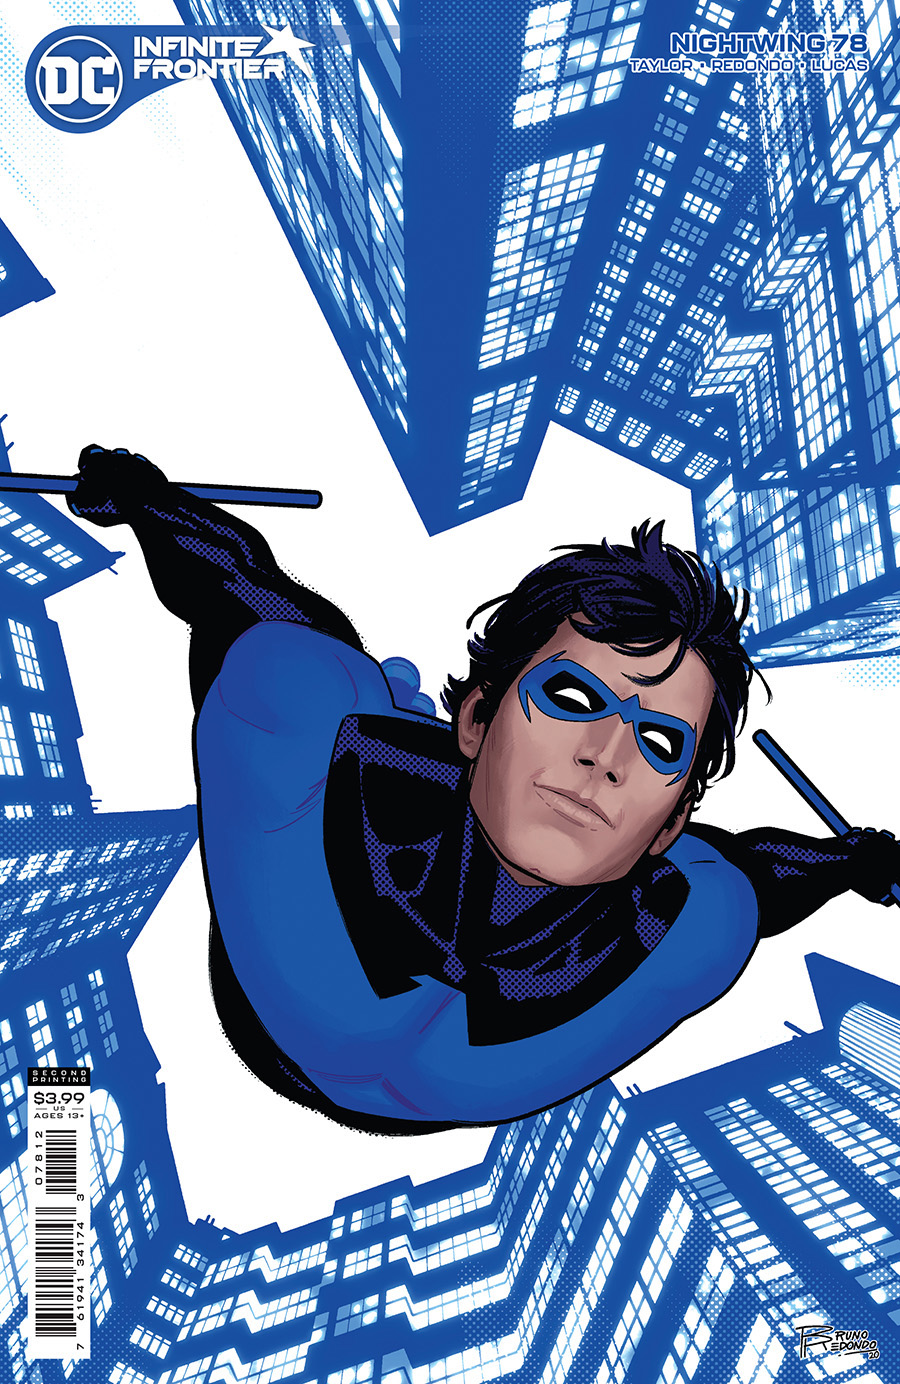 Nightwing Vol 4 #78 Cover C 2nd Ptg Bruno Redondo Variant Cover (Limit 1 Per Customer)